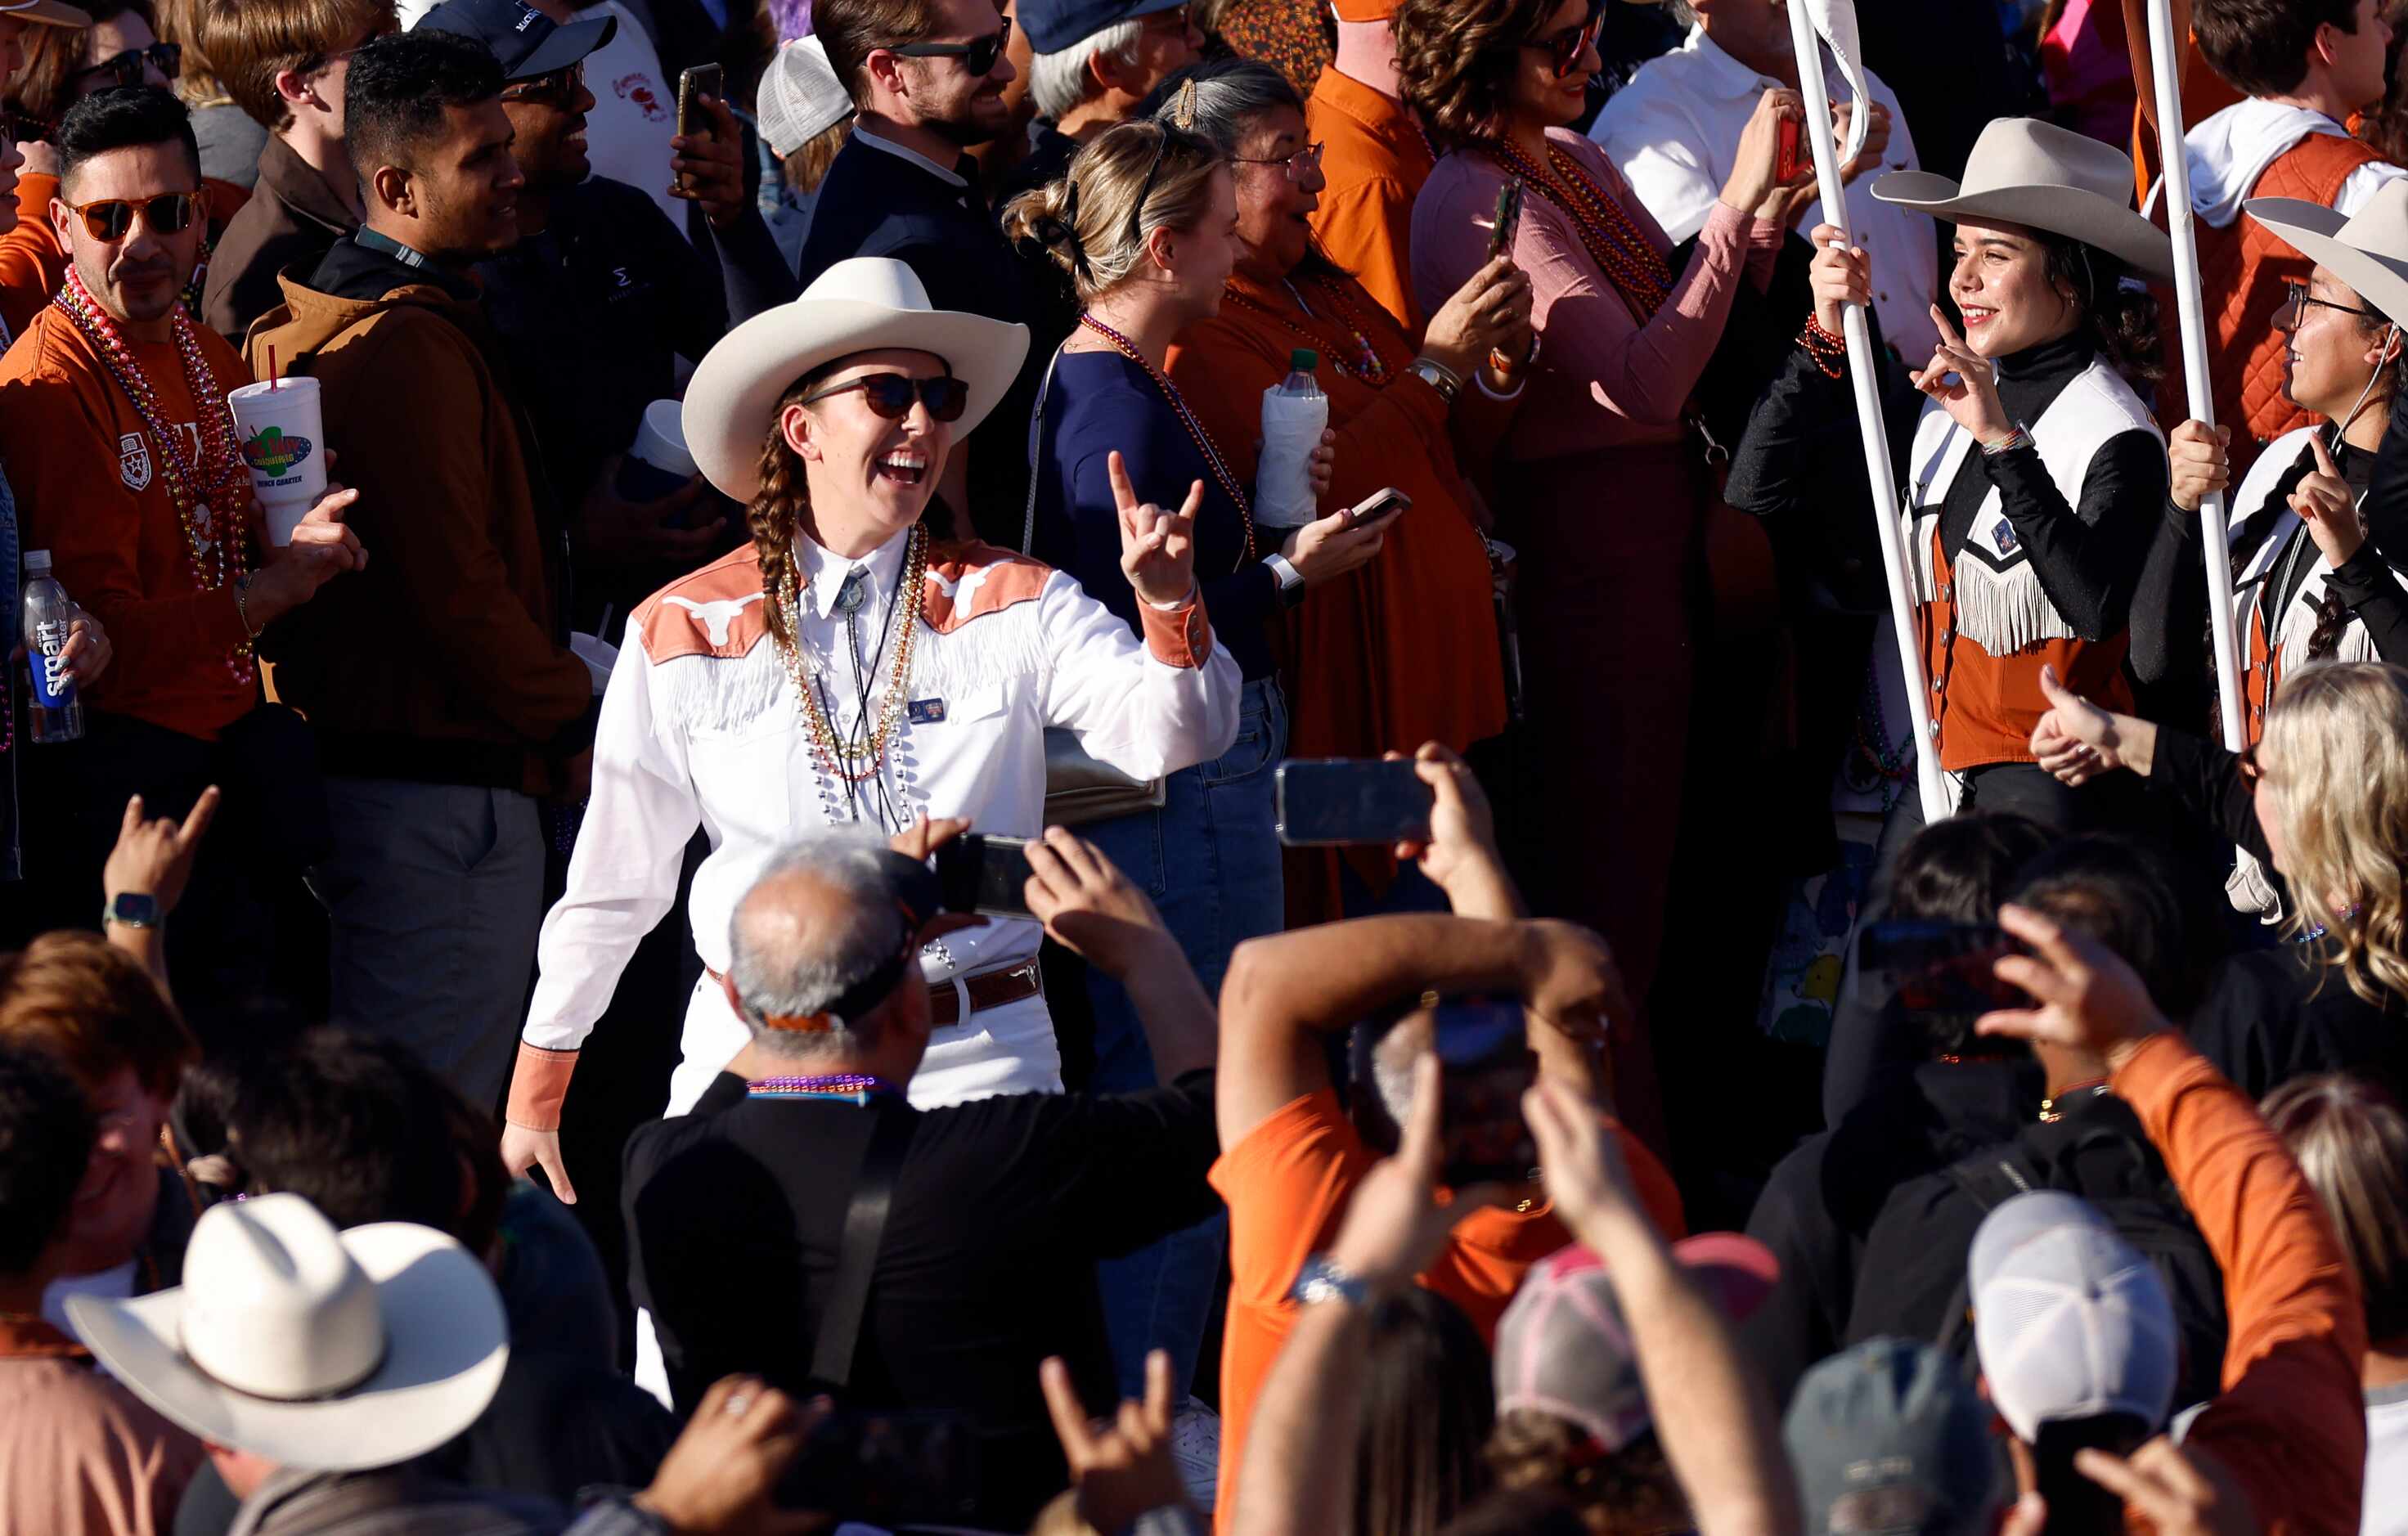 University of Texas Longhorn Band marches into Jackson Square during the Mardi Gras-style...